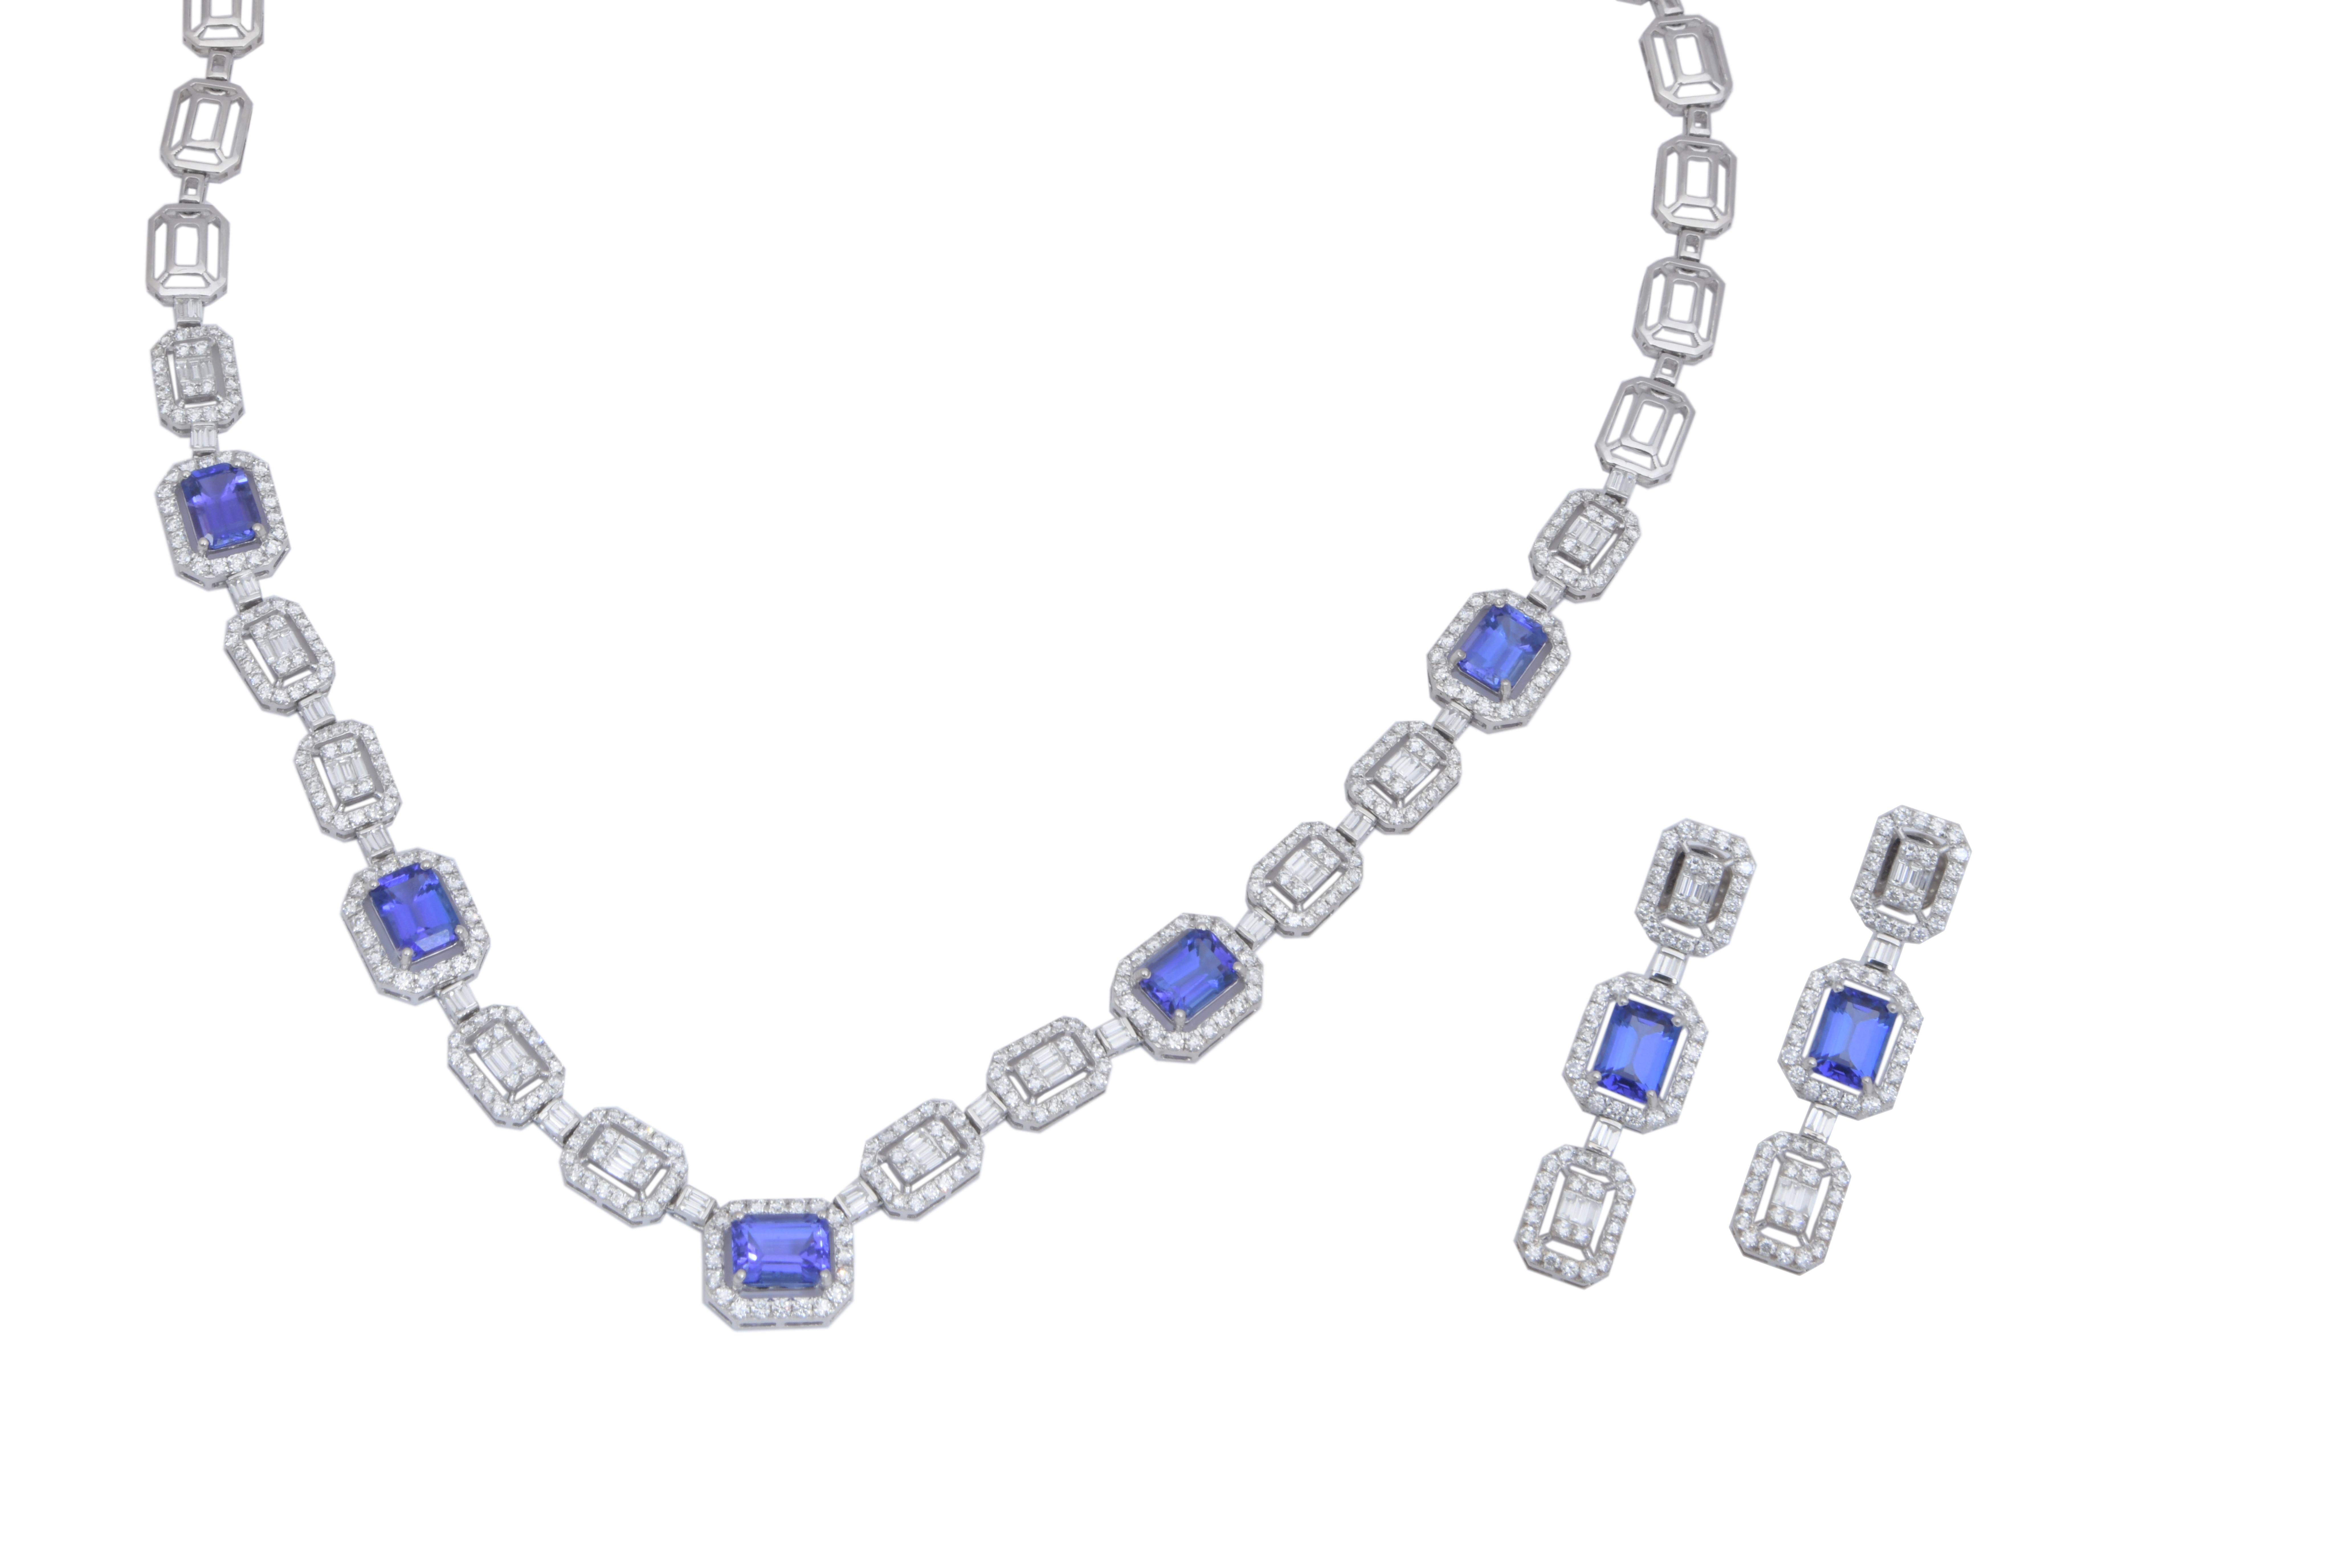 Natural Tanzanite Necklace 7.74cts Diamond & 12.13cts Tanzanite Withgold 14k In New Condition For Sale In New York, NY